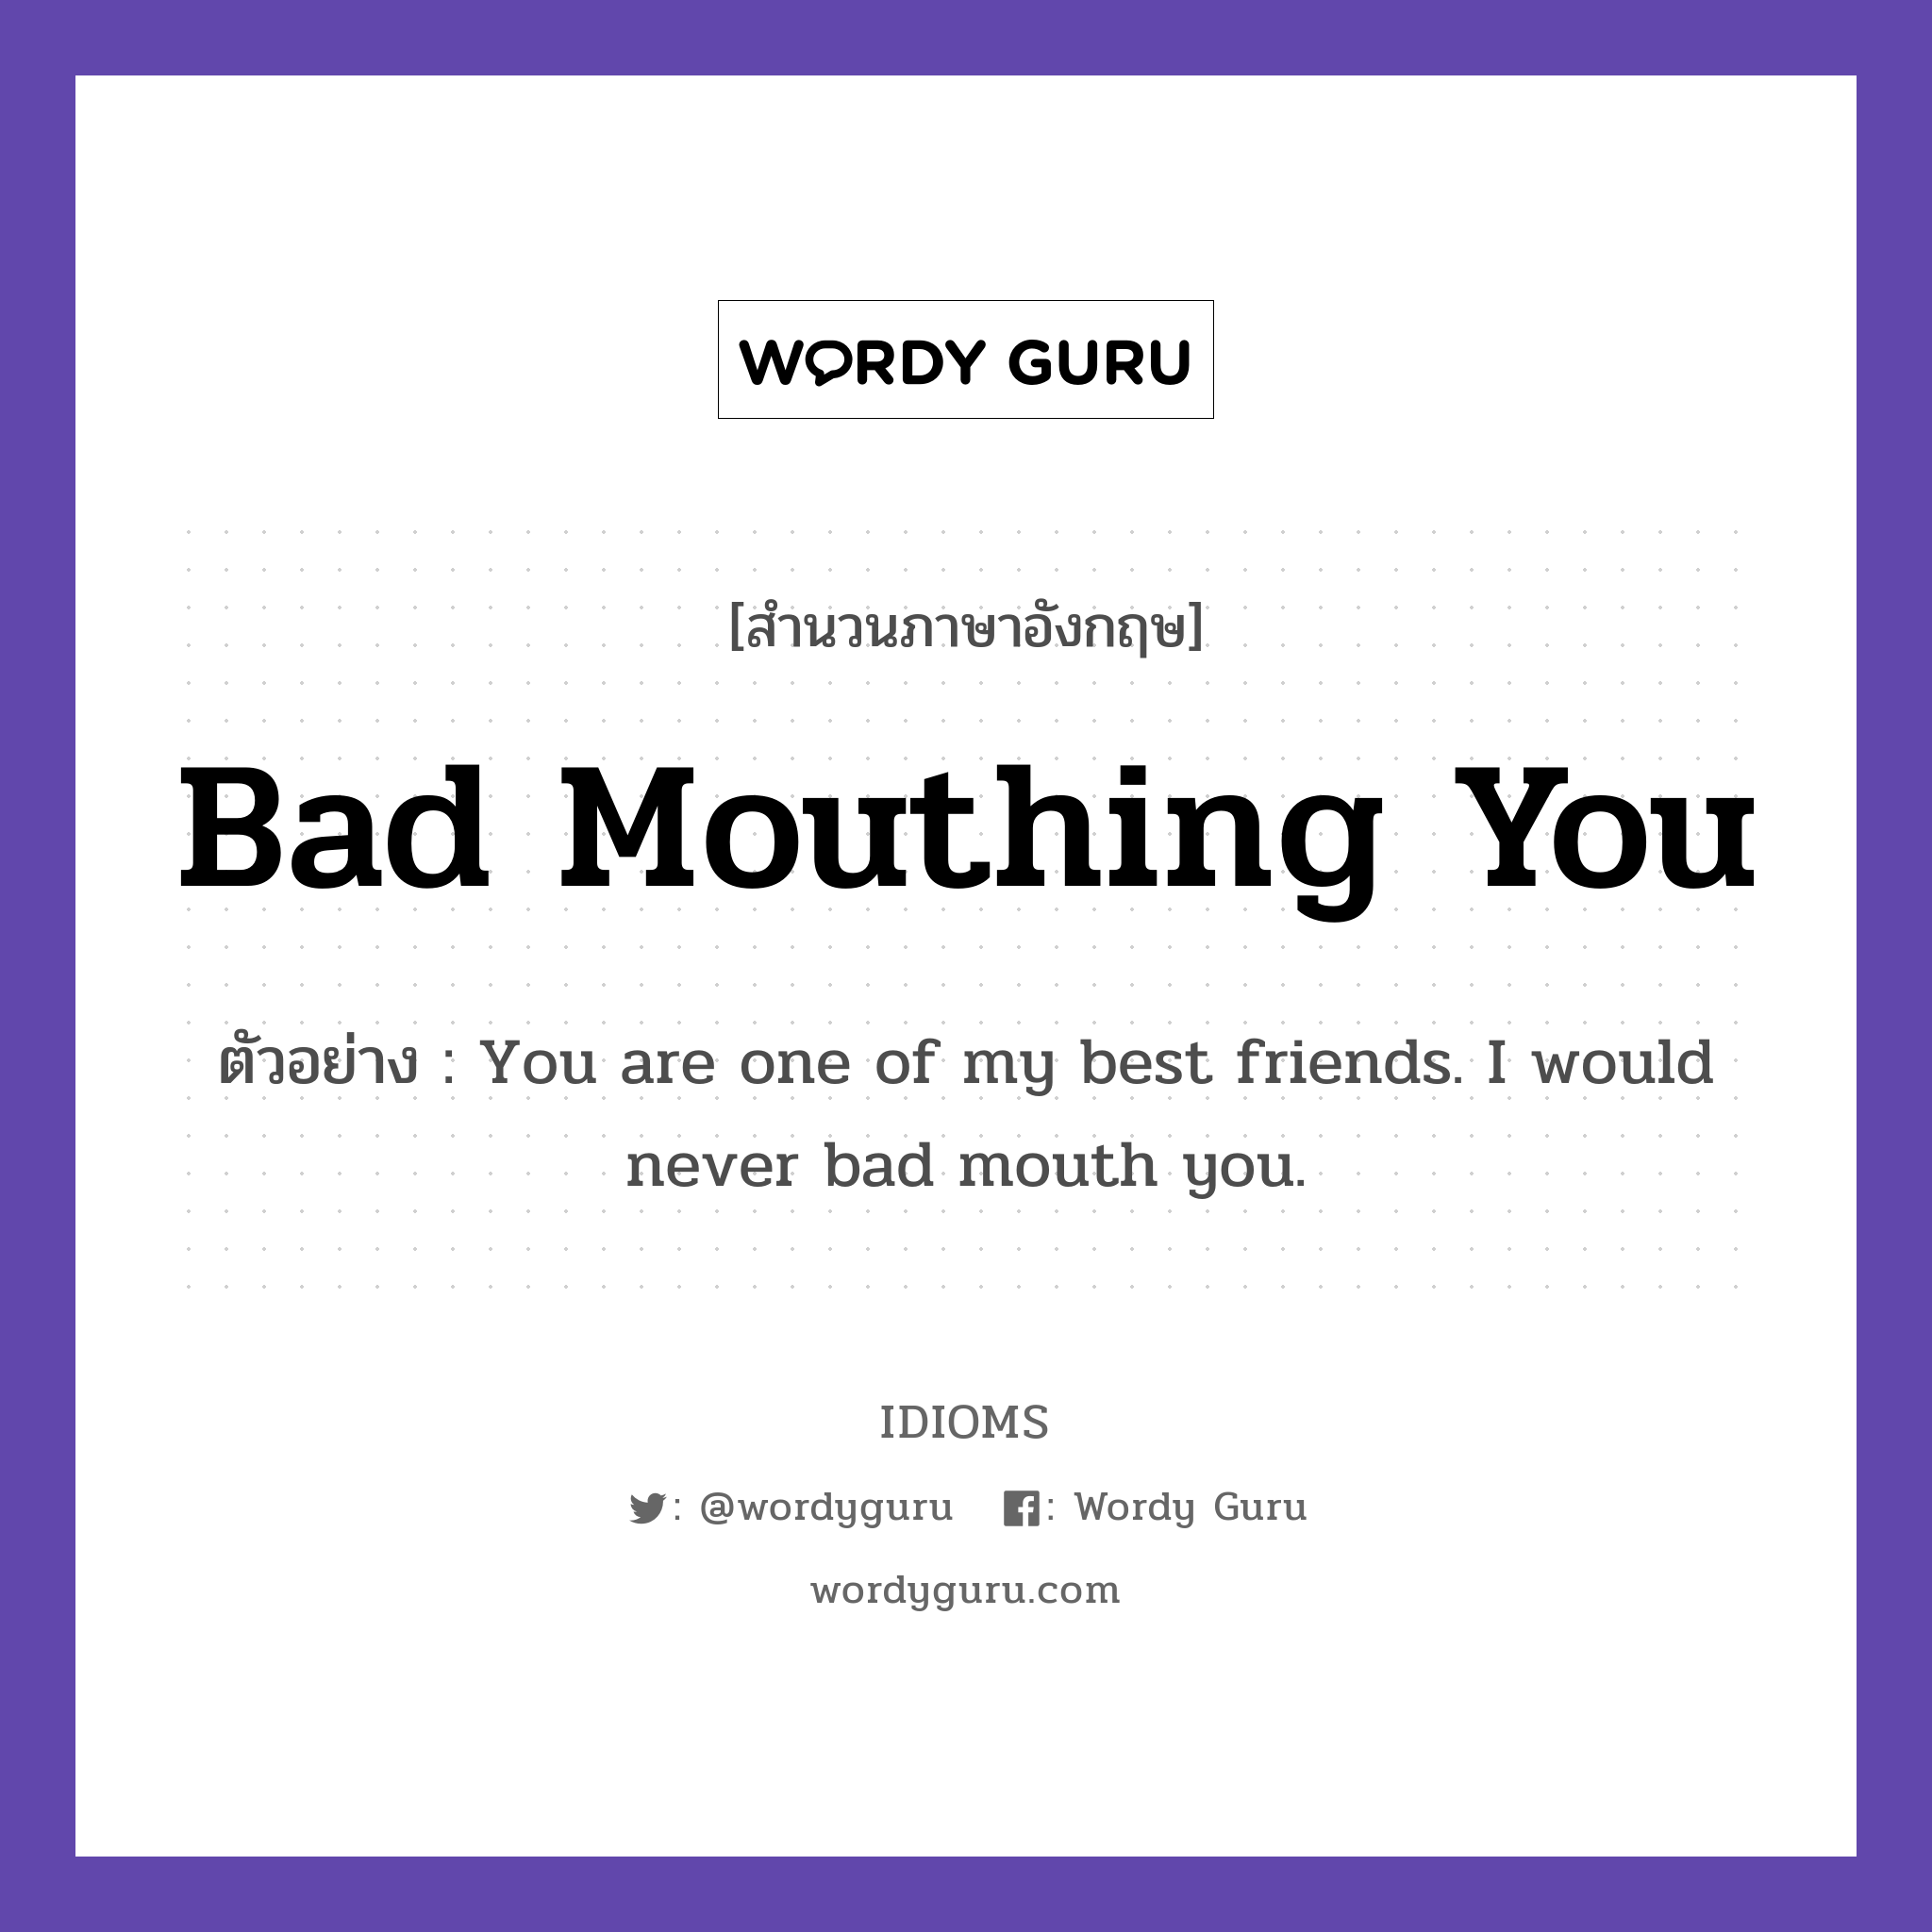 Bad Mouthing You แปลว่า?, สำนวนภาษาอังกฤษ Bad Mouthing You ตัวอย่าง You are one of my best friends. I would never bad mouth you.